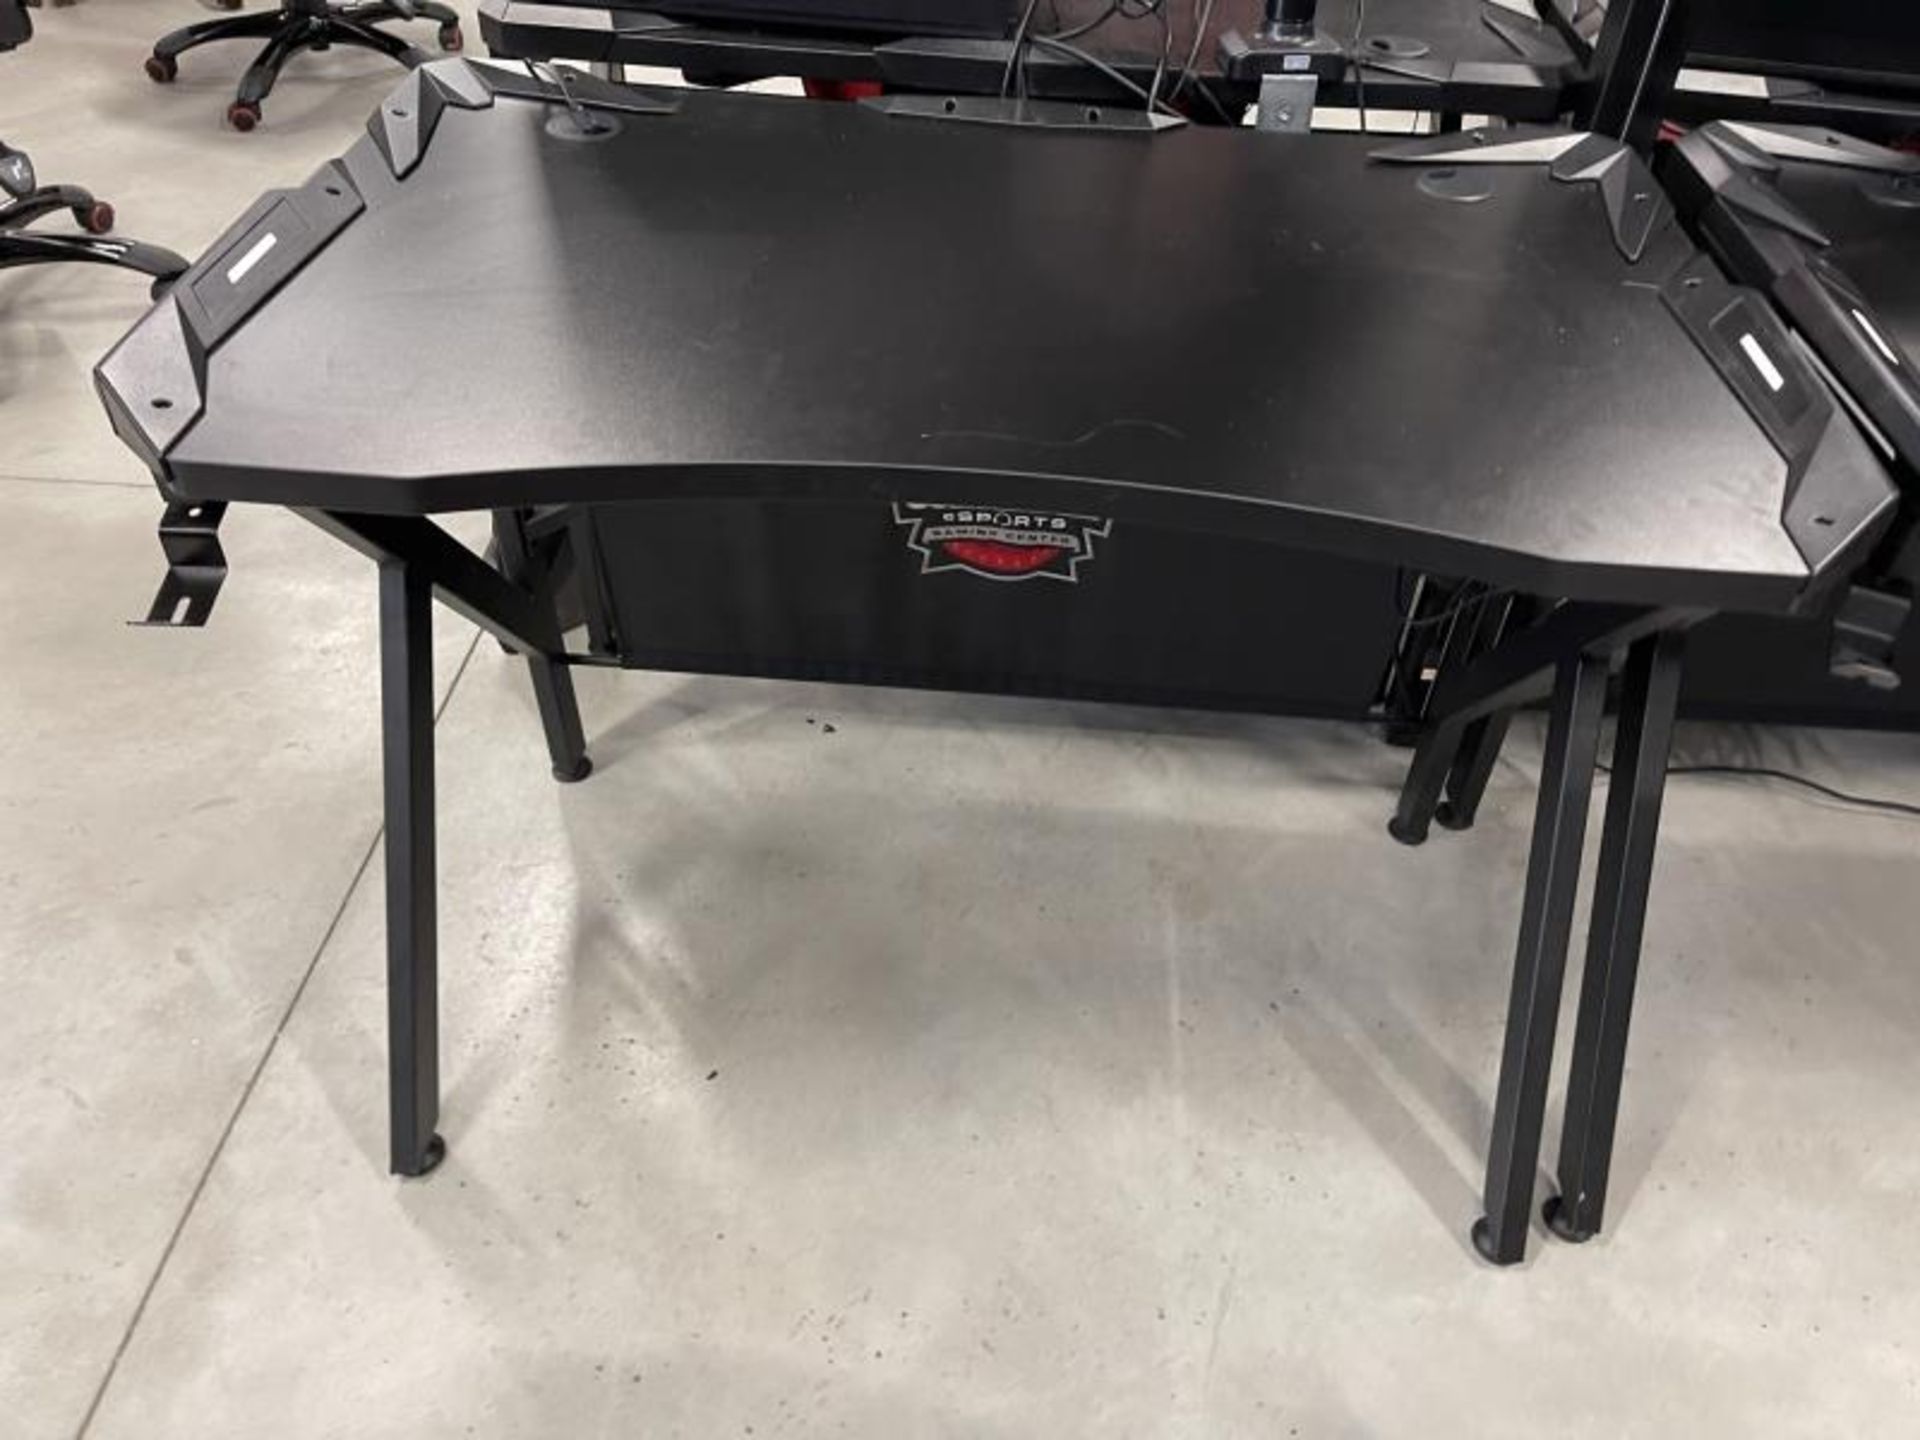 Gaming Desk 40" x 24" w/ Contender Red & Black Gaming Chair - Image 3 of 4